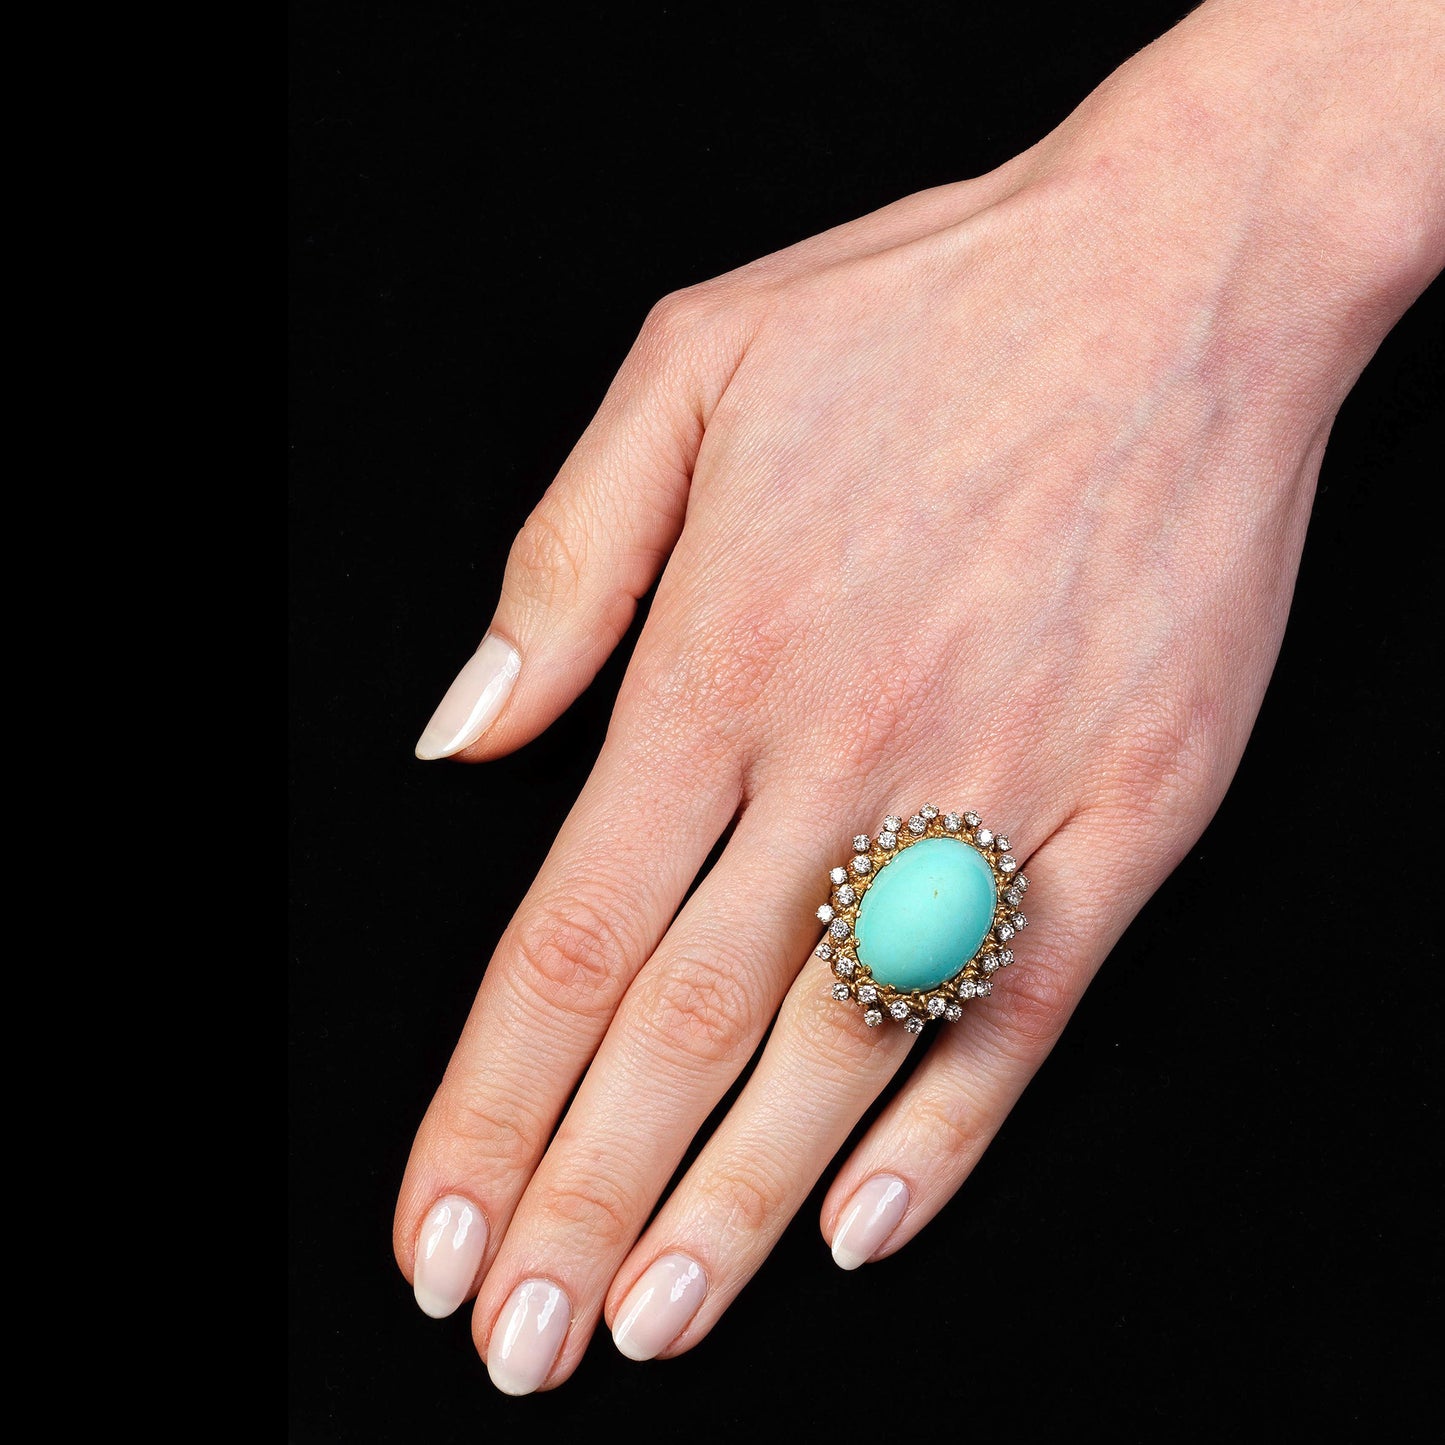 Vintage Turquoise and Diamond Dress Ring